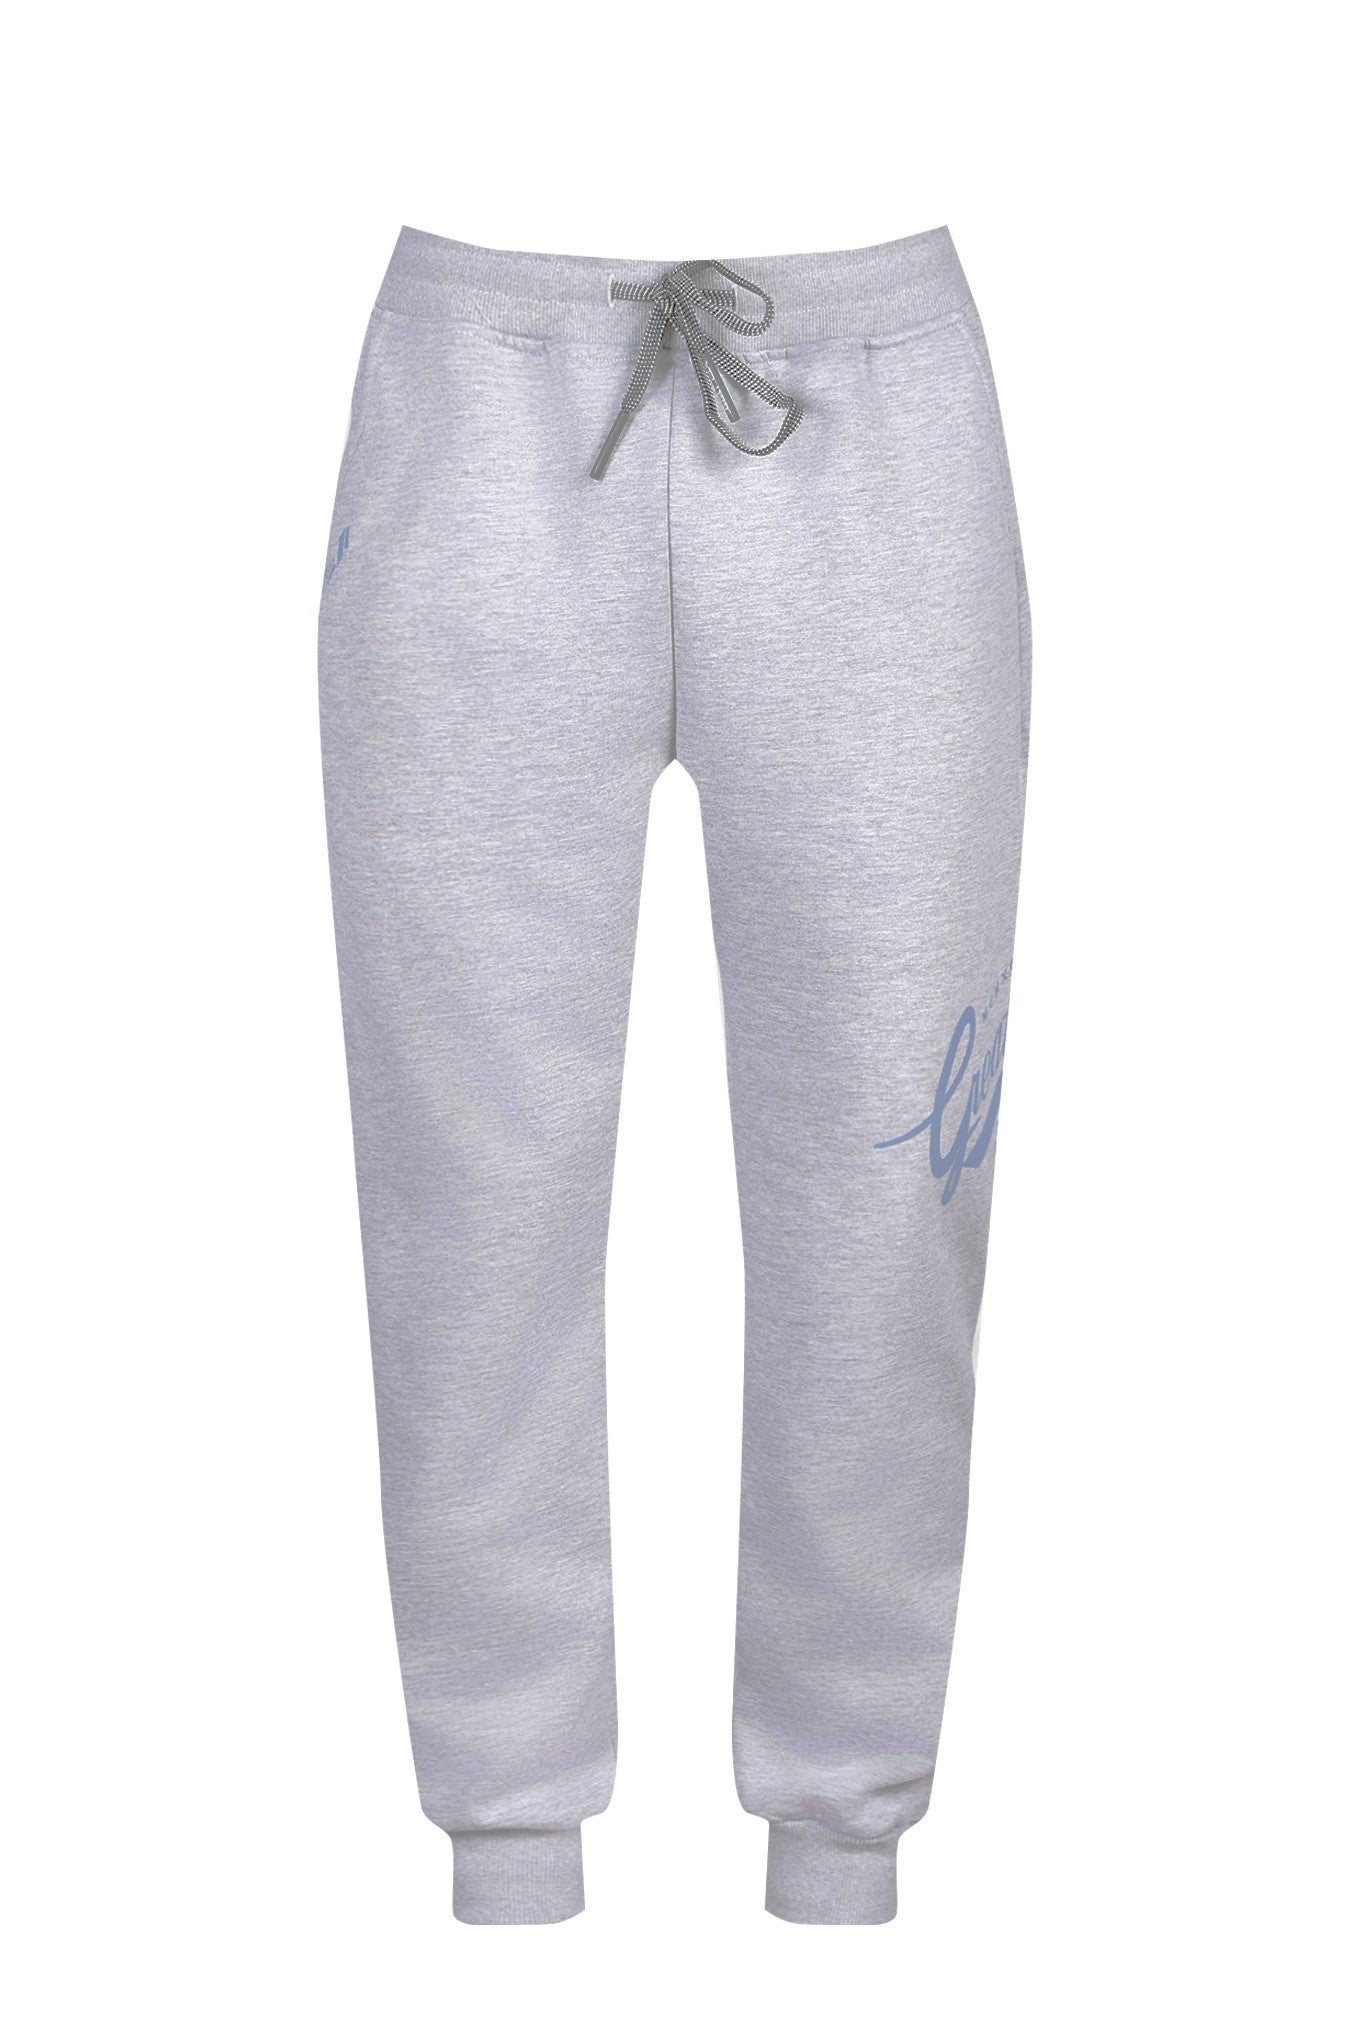 Great City Joggers